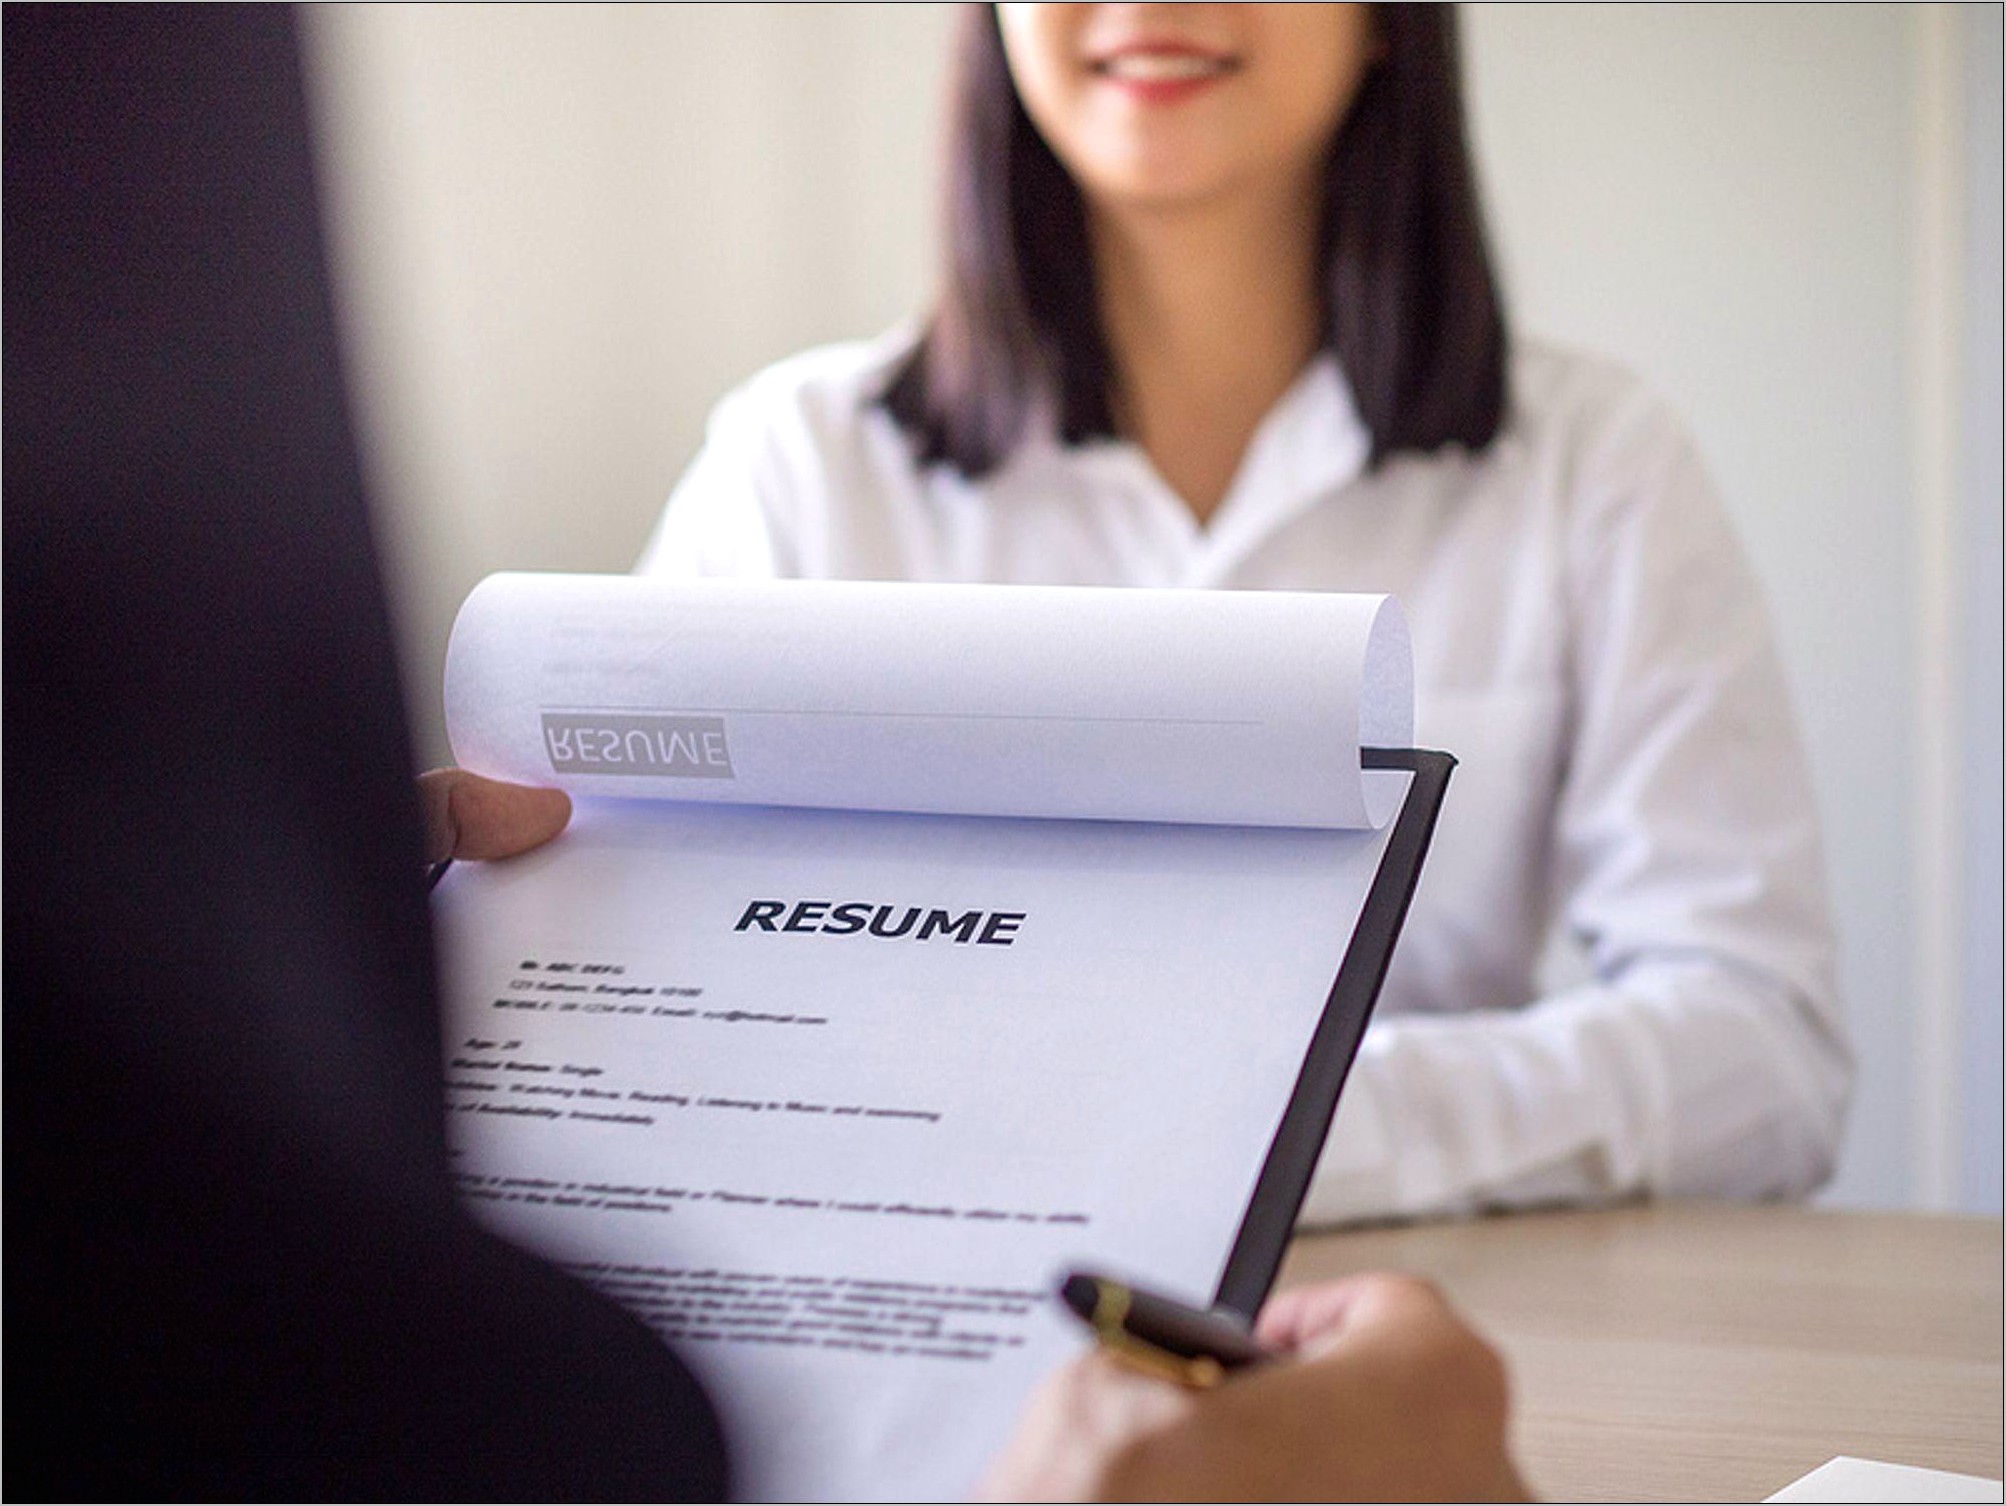 Good Resumes From Hiring Managers